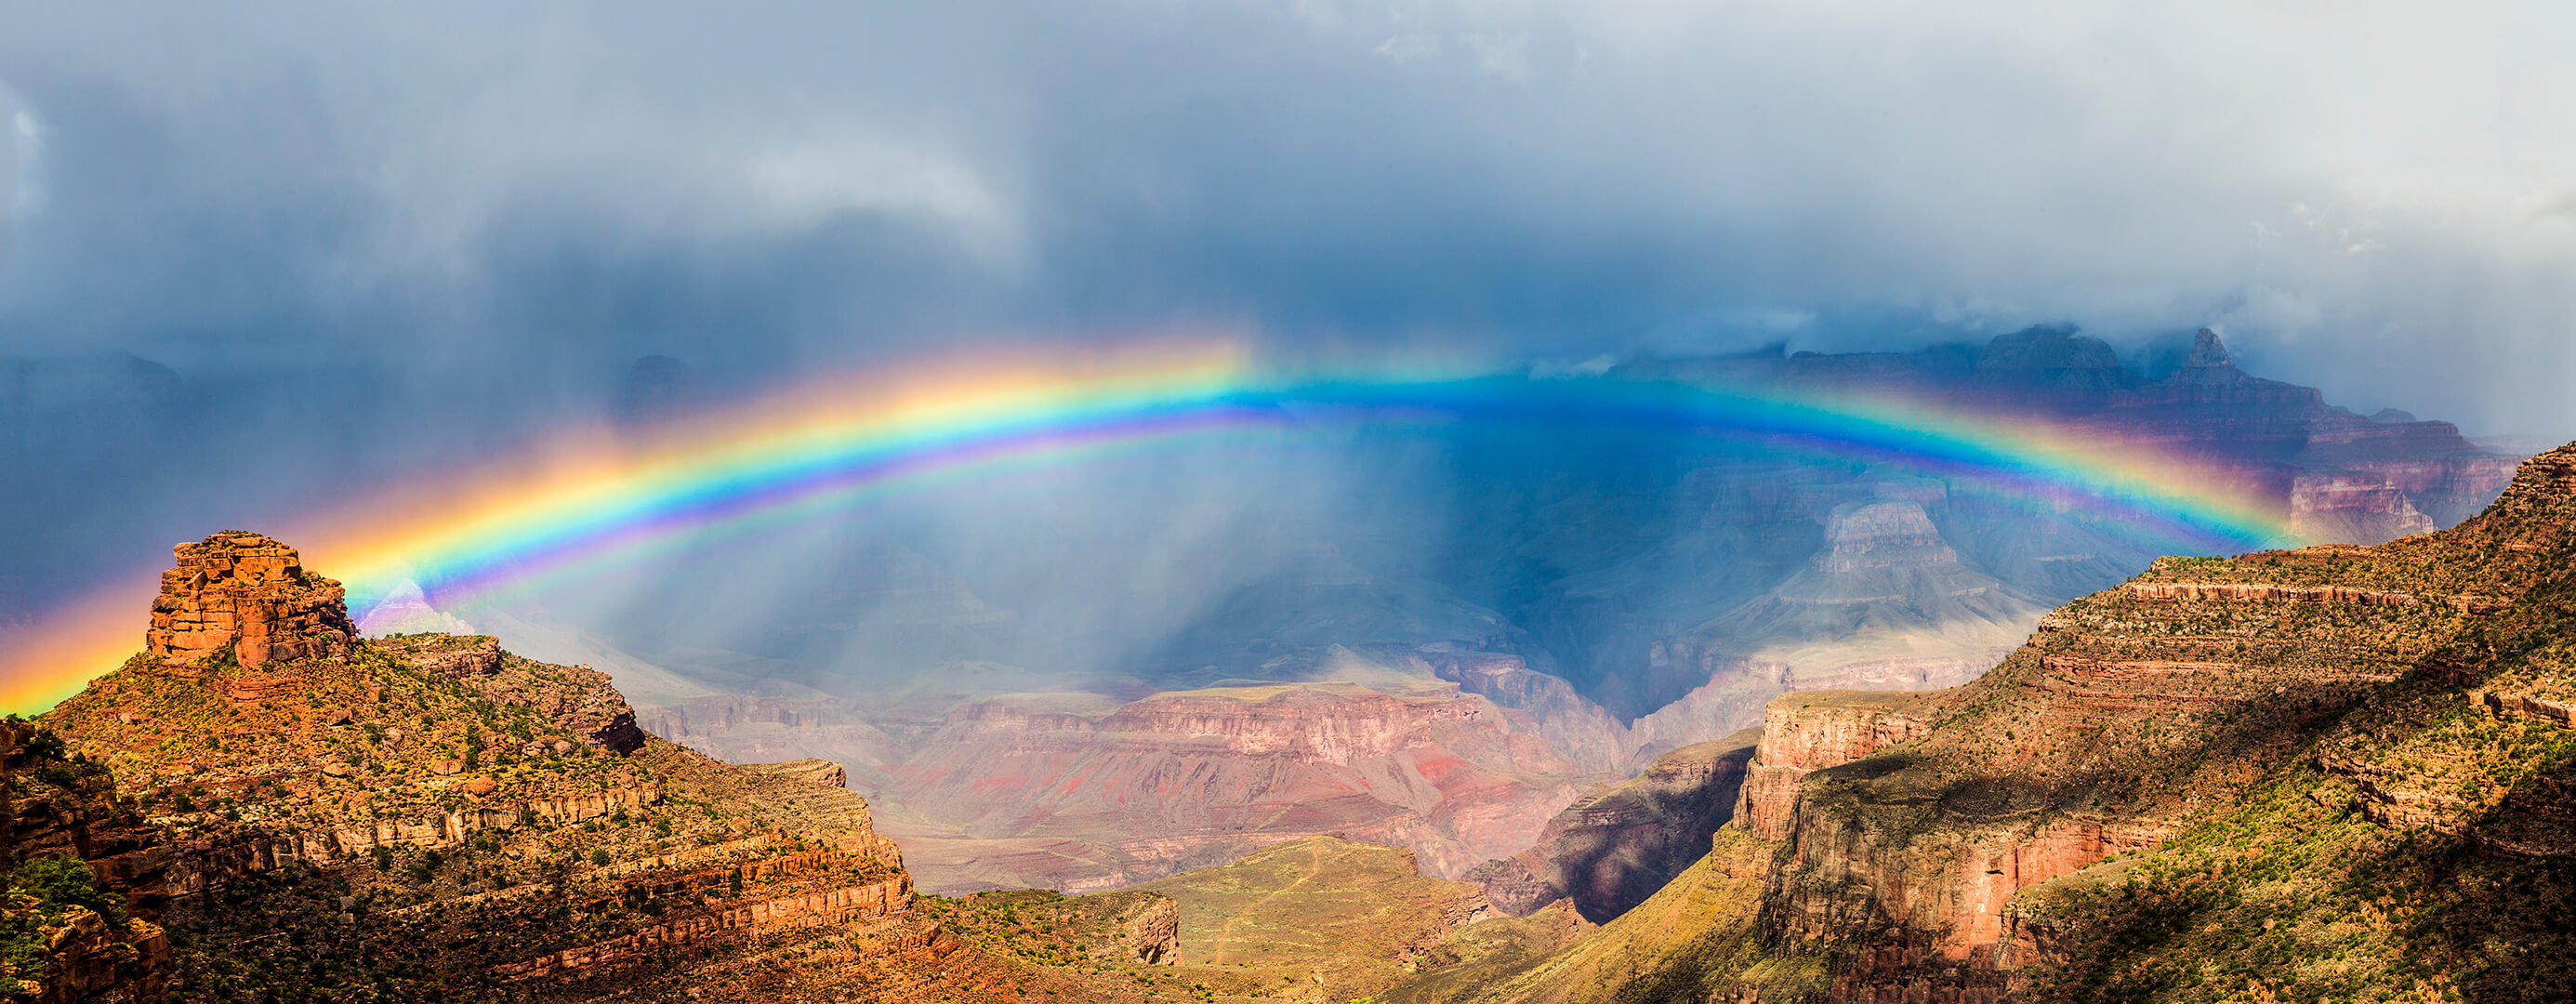 Rainbow across and above the Grand Canyon.